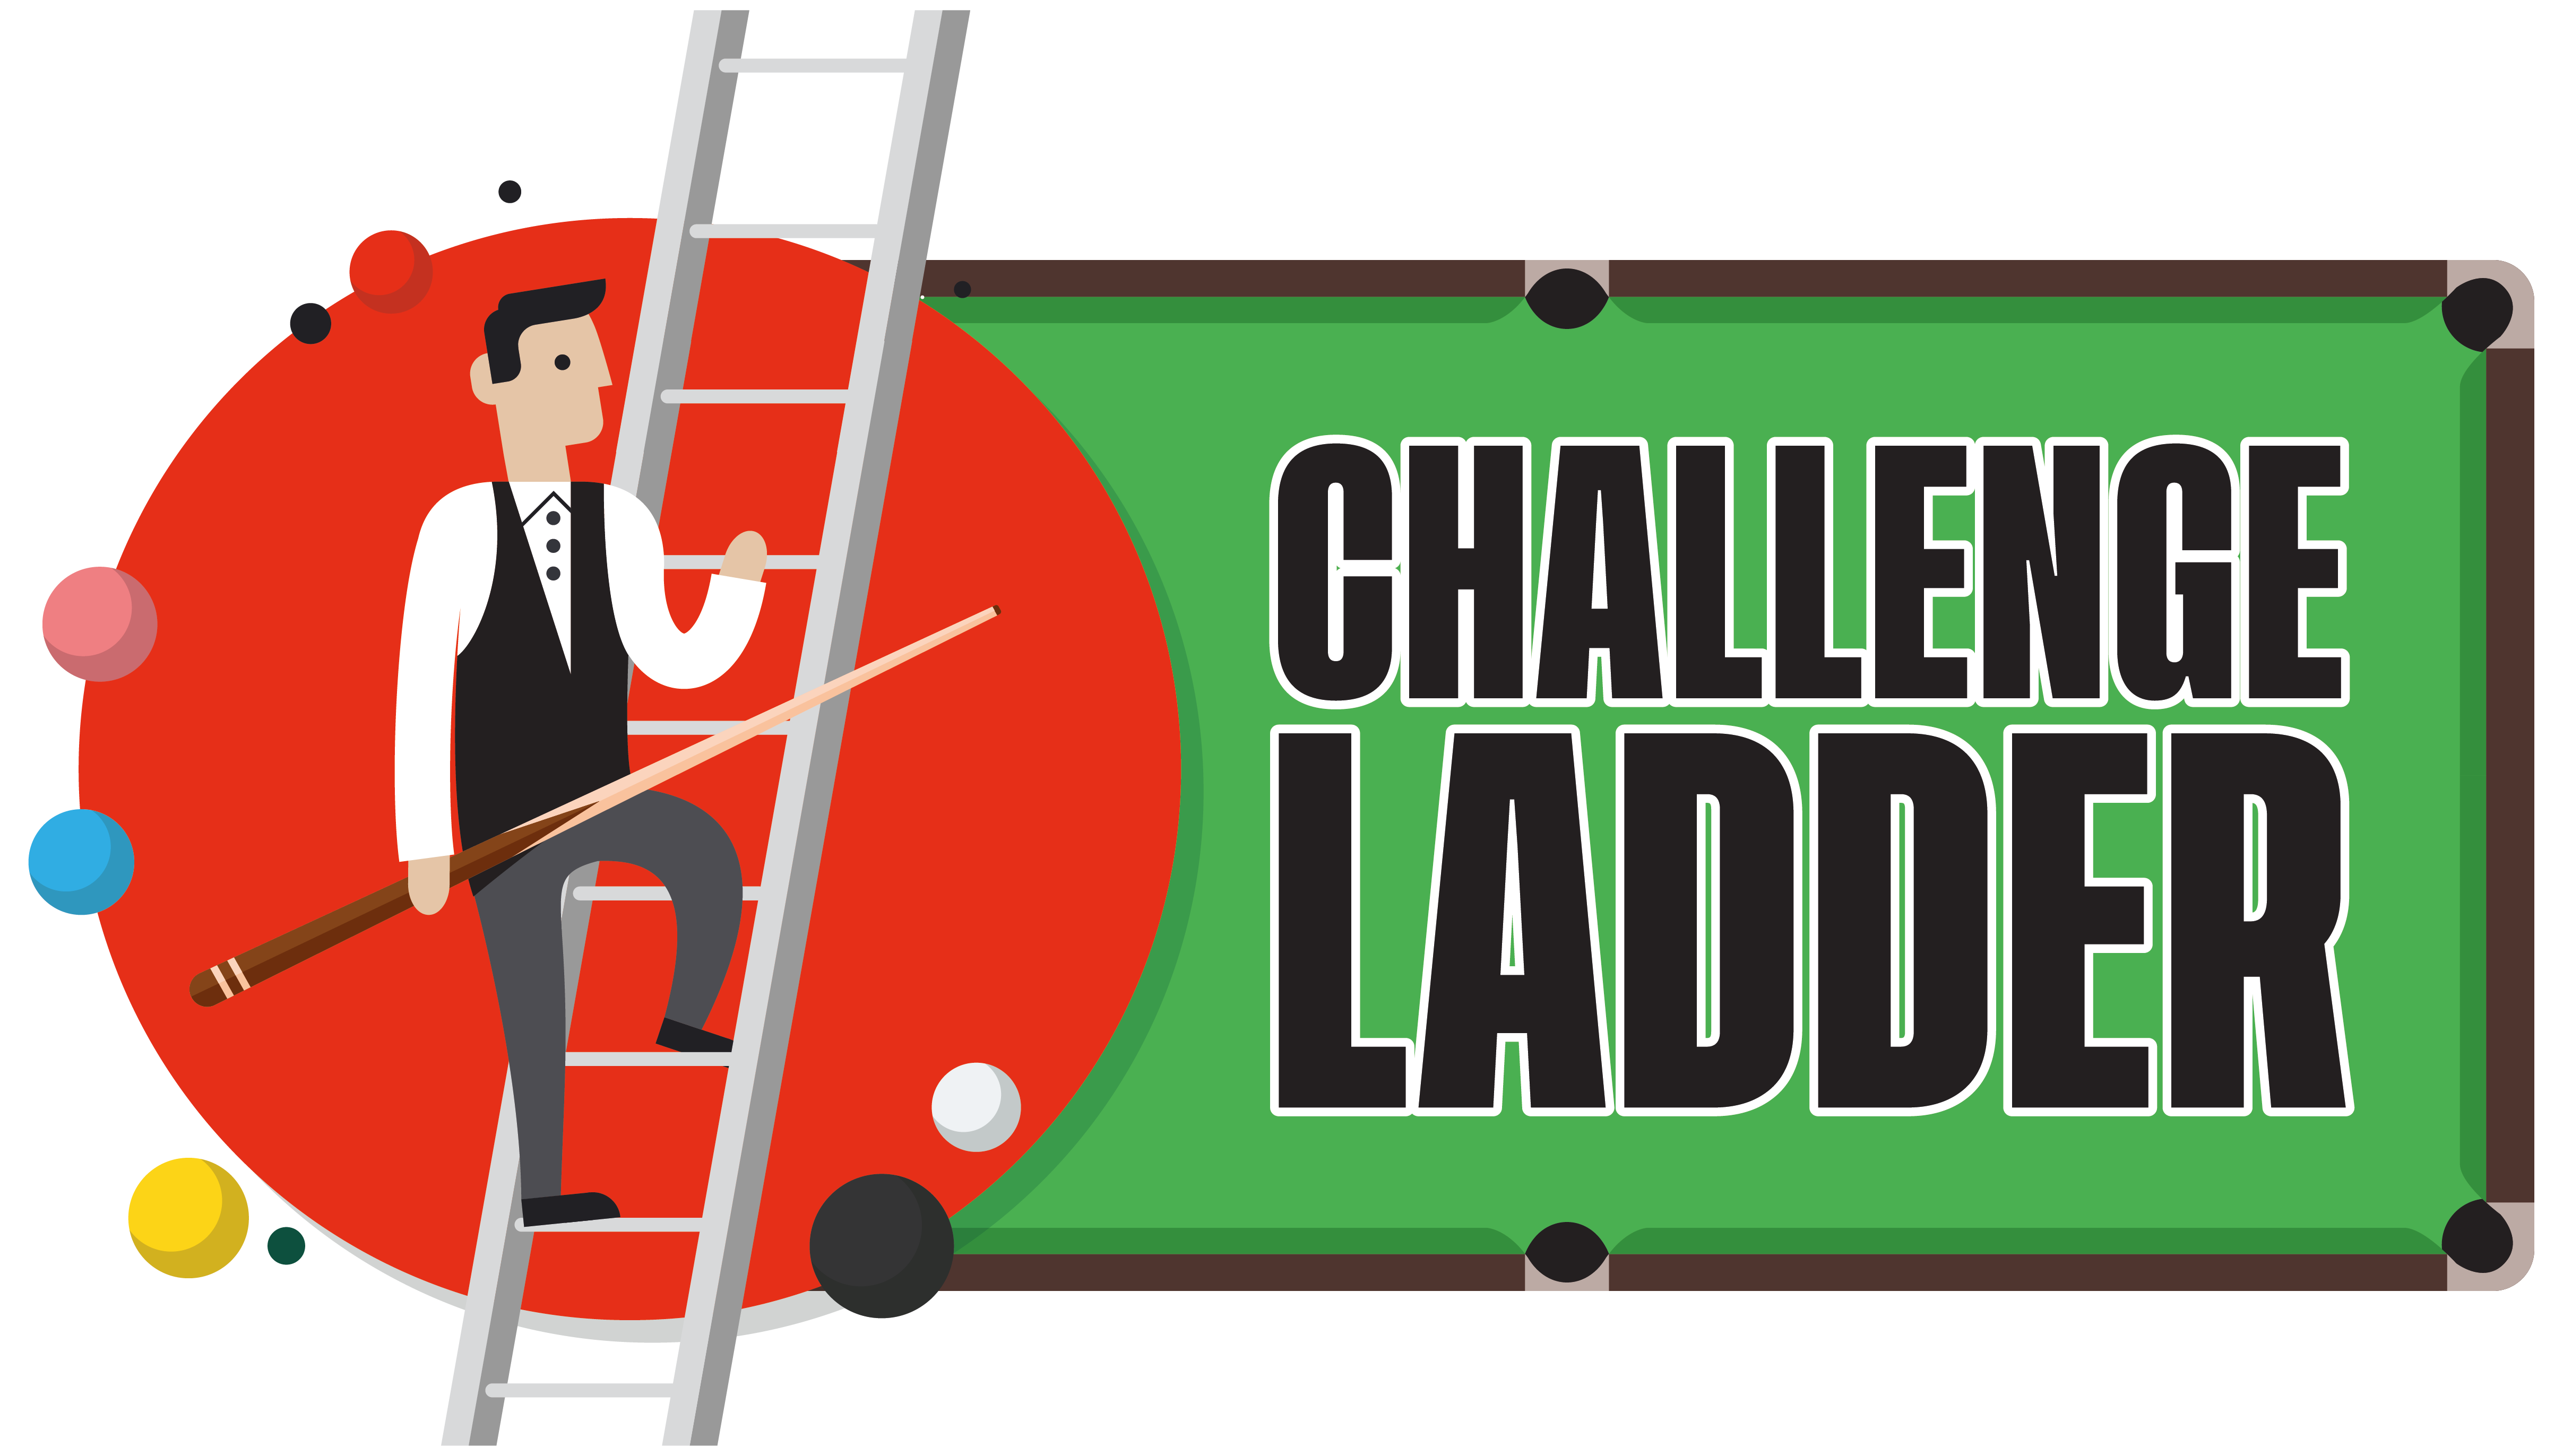 Sign up to the Challenge Ladder